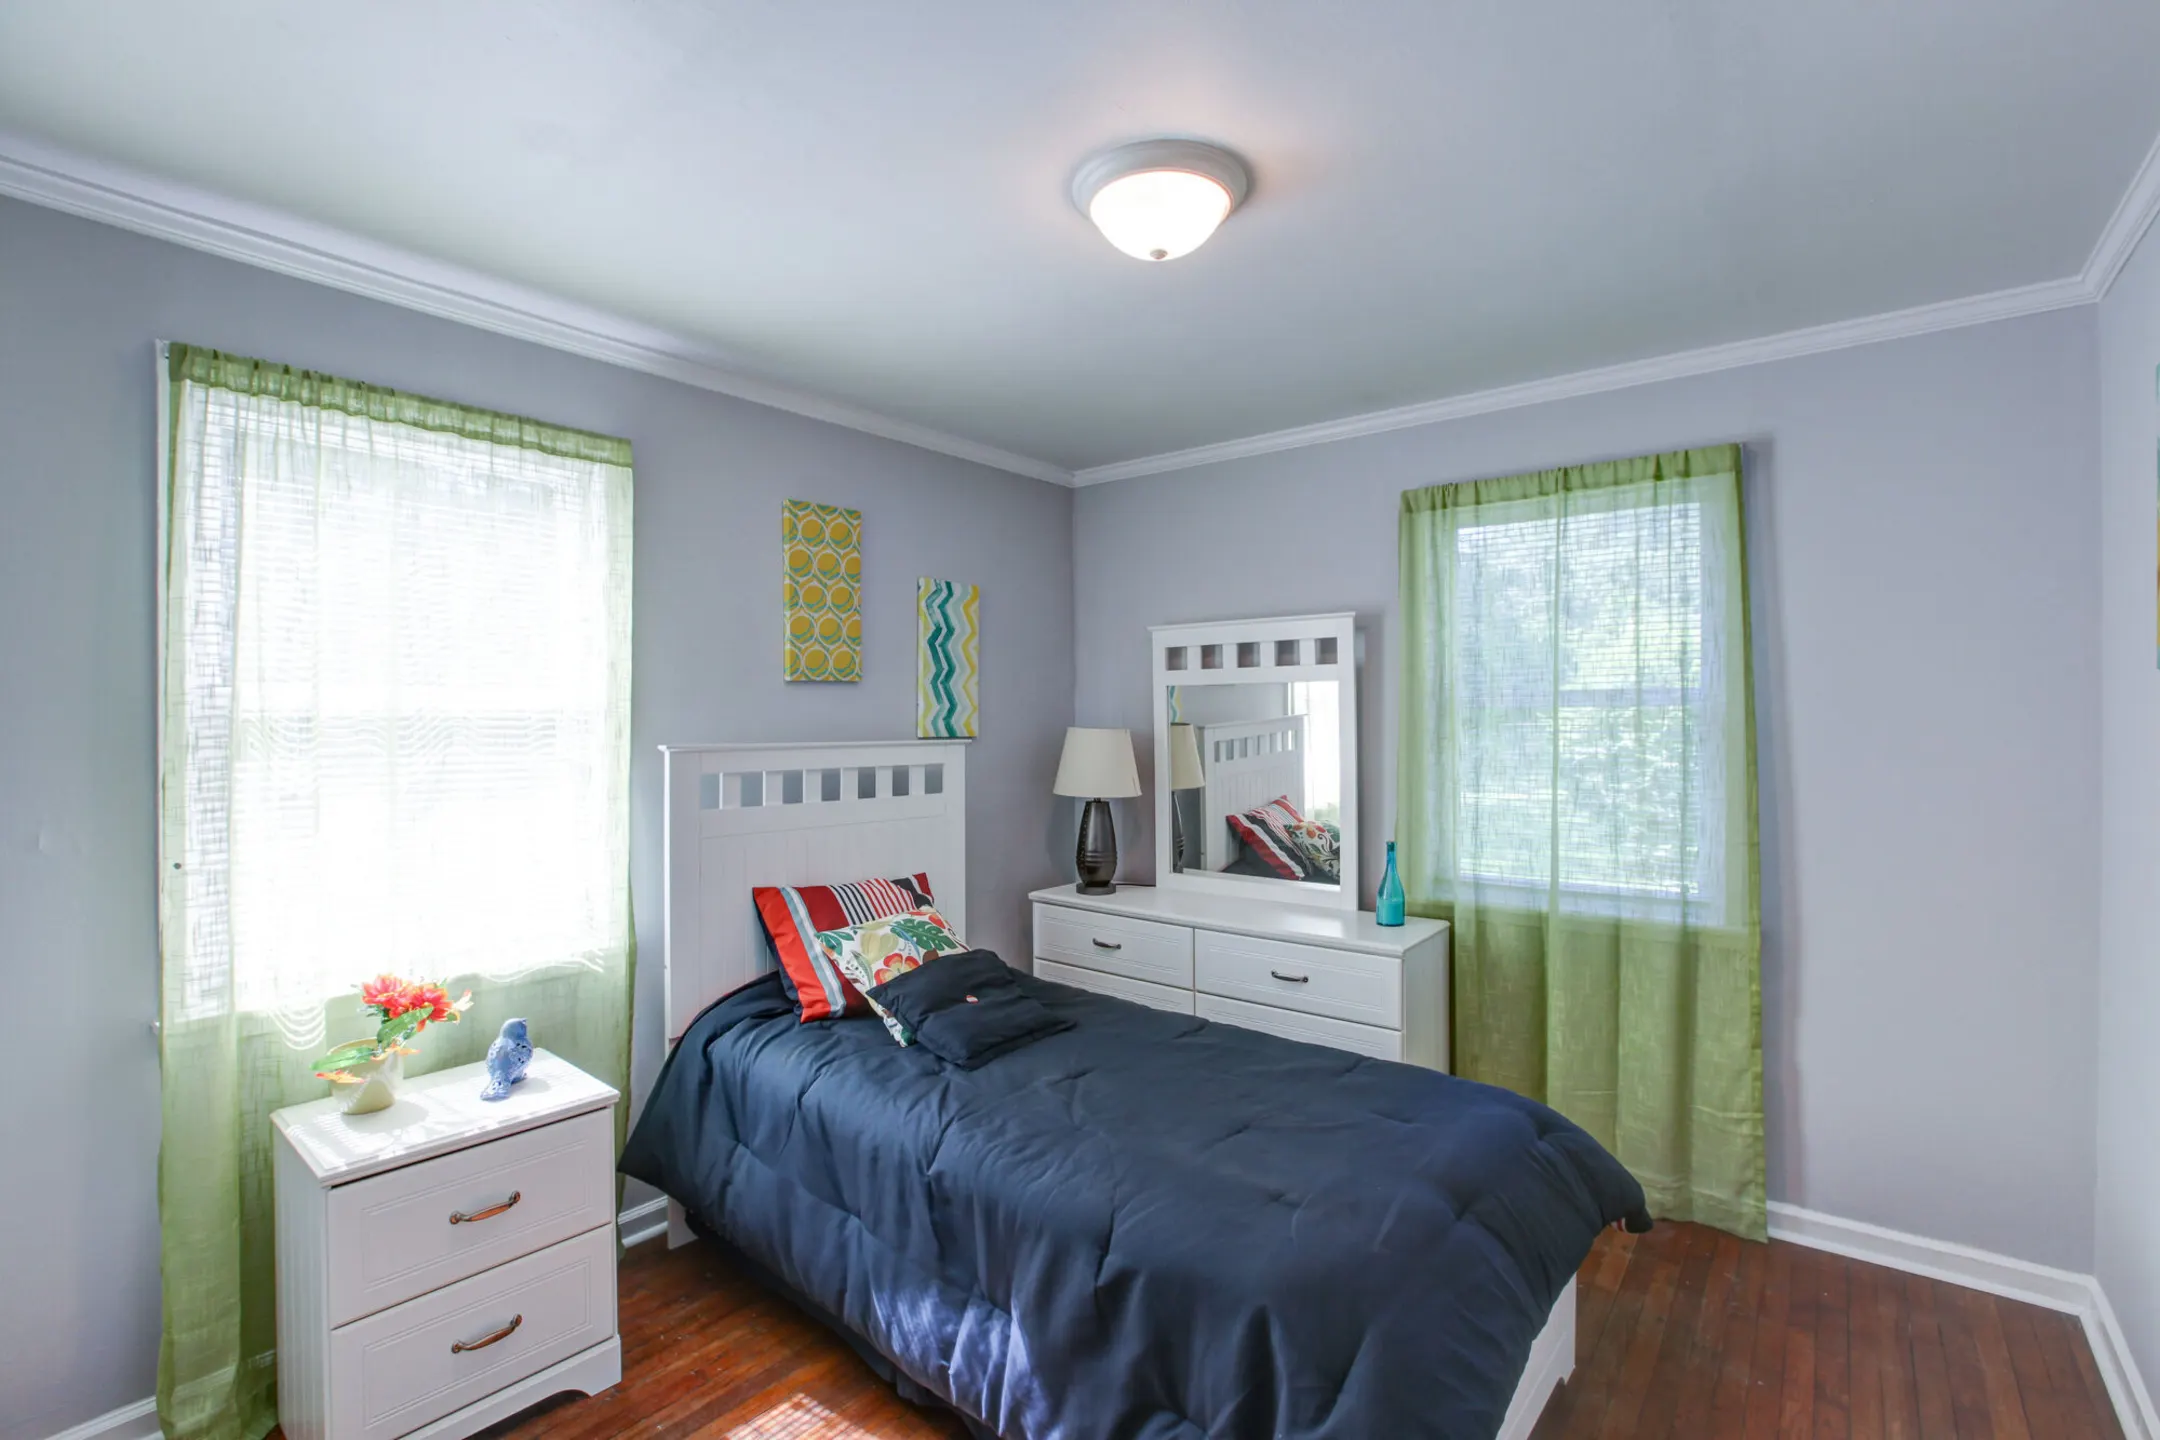 Bedroom - The Meadows at Edgemont - Gastonia, NC